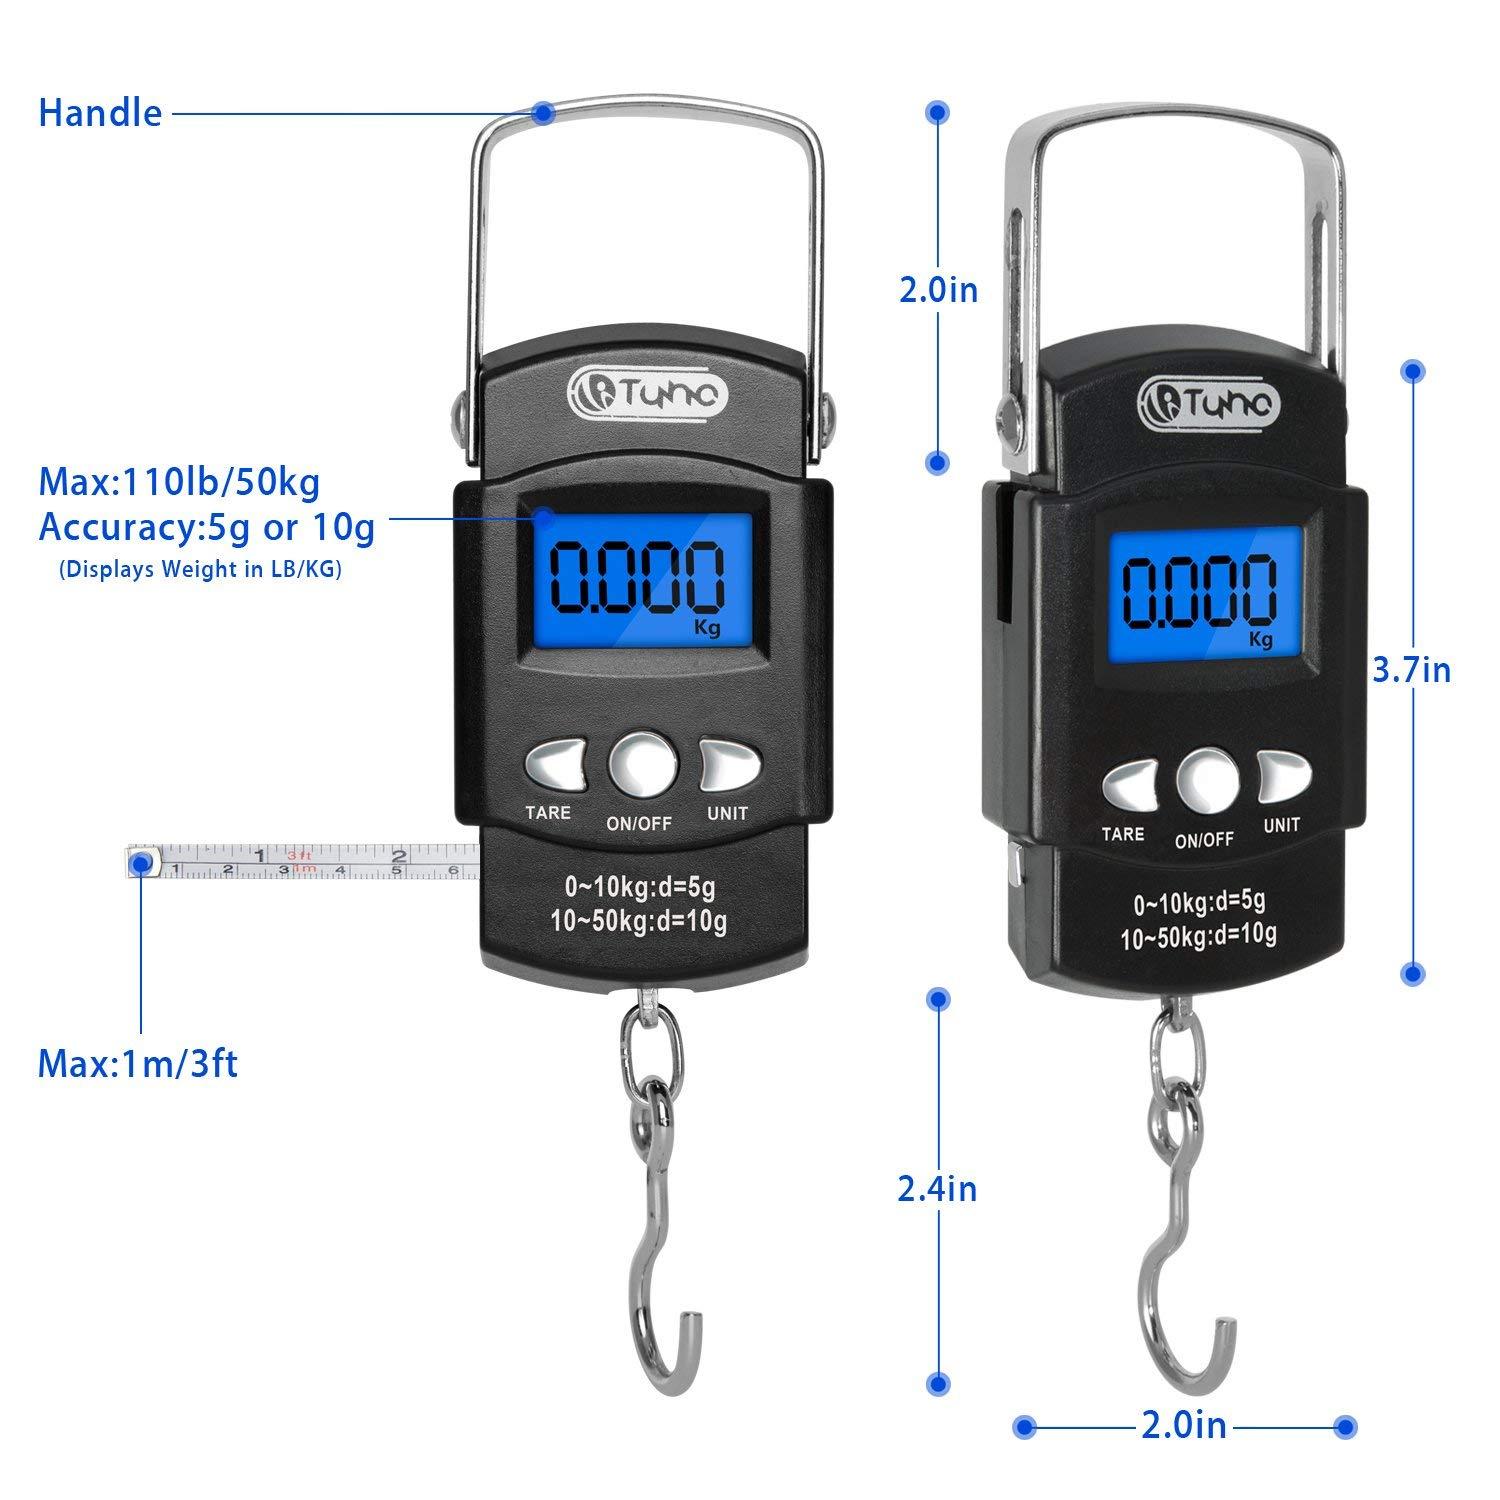 Portable Fishing Scale, Backlit LCD Display Hanging Scale